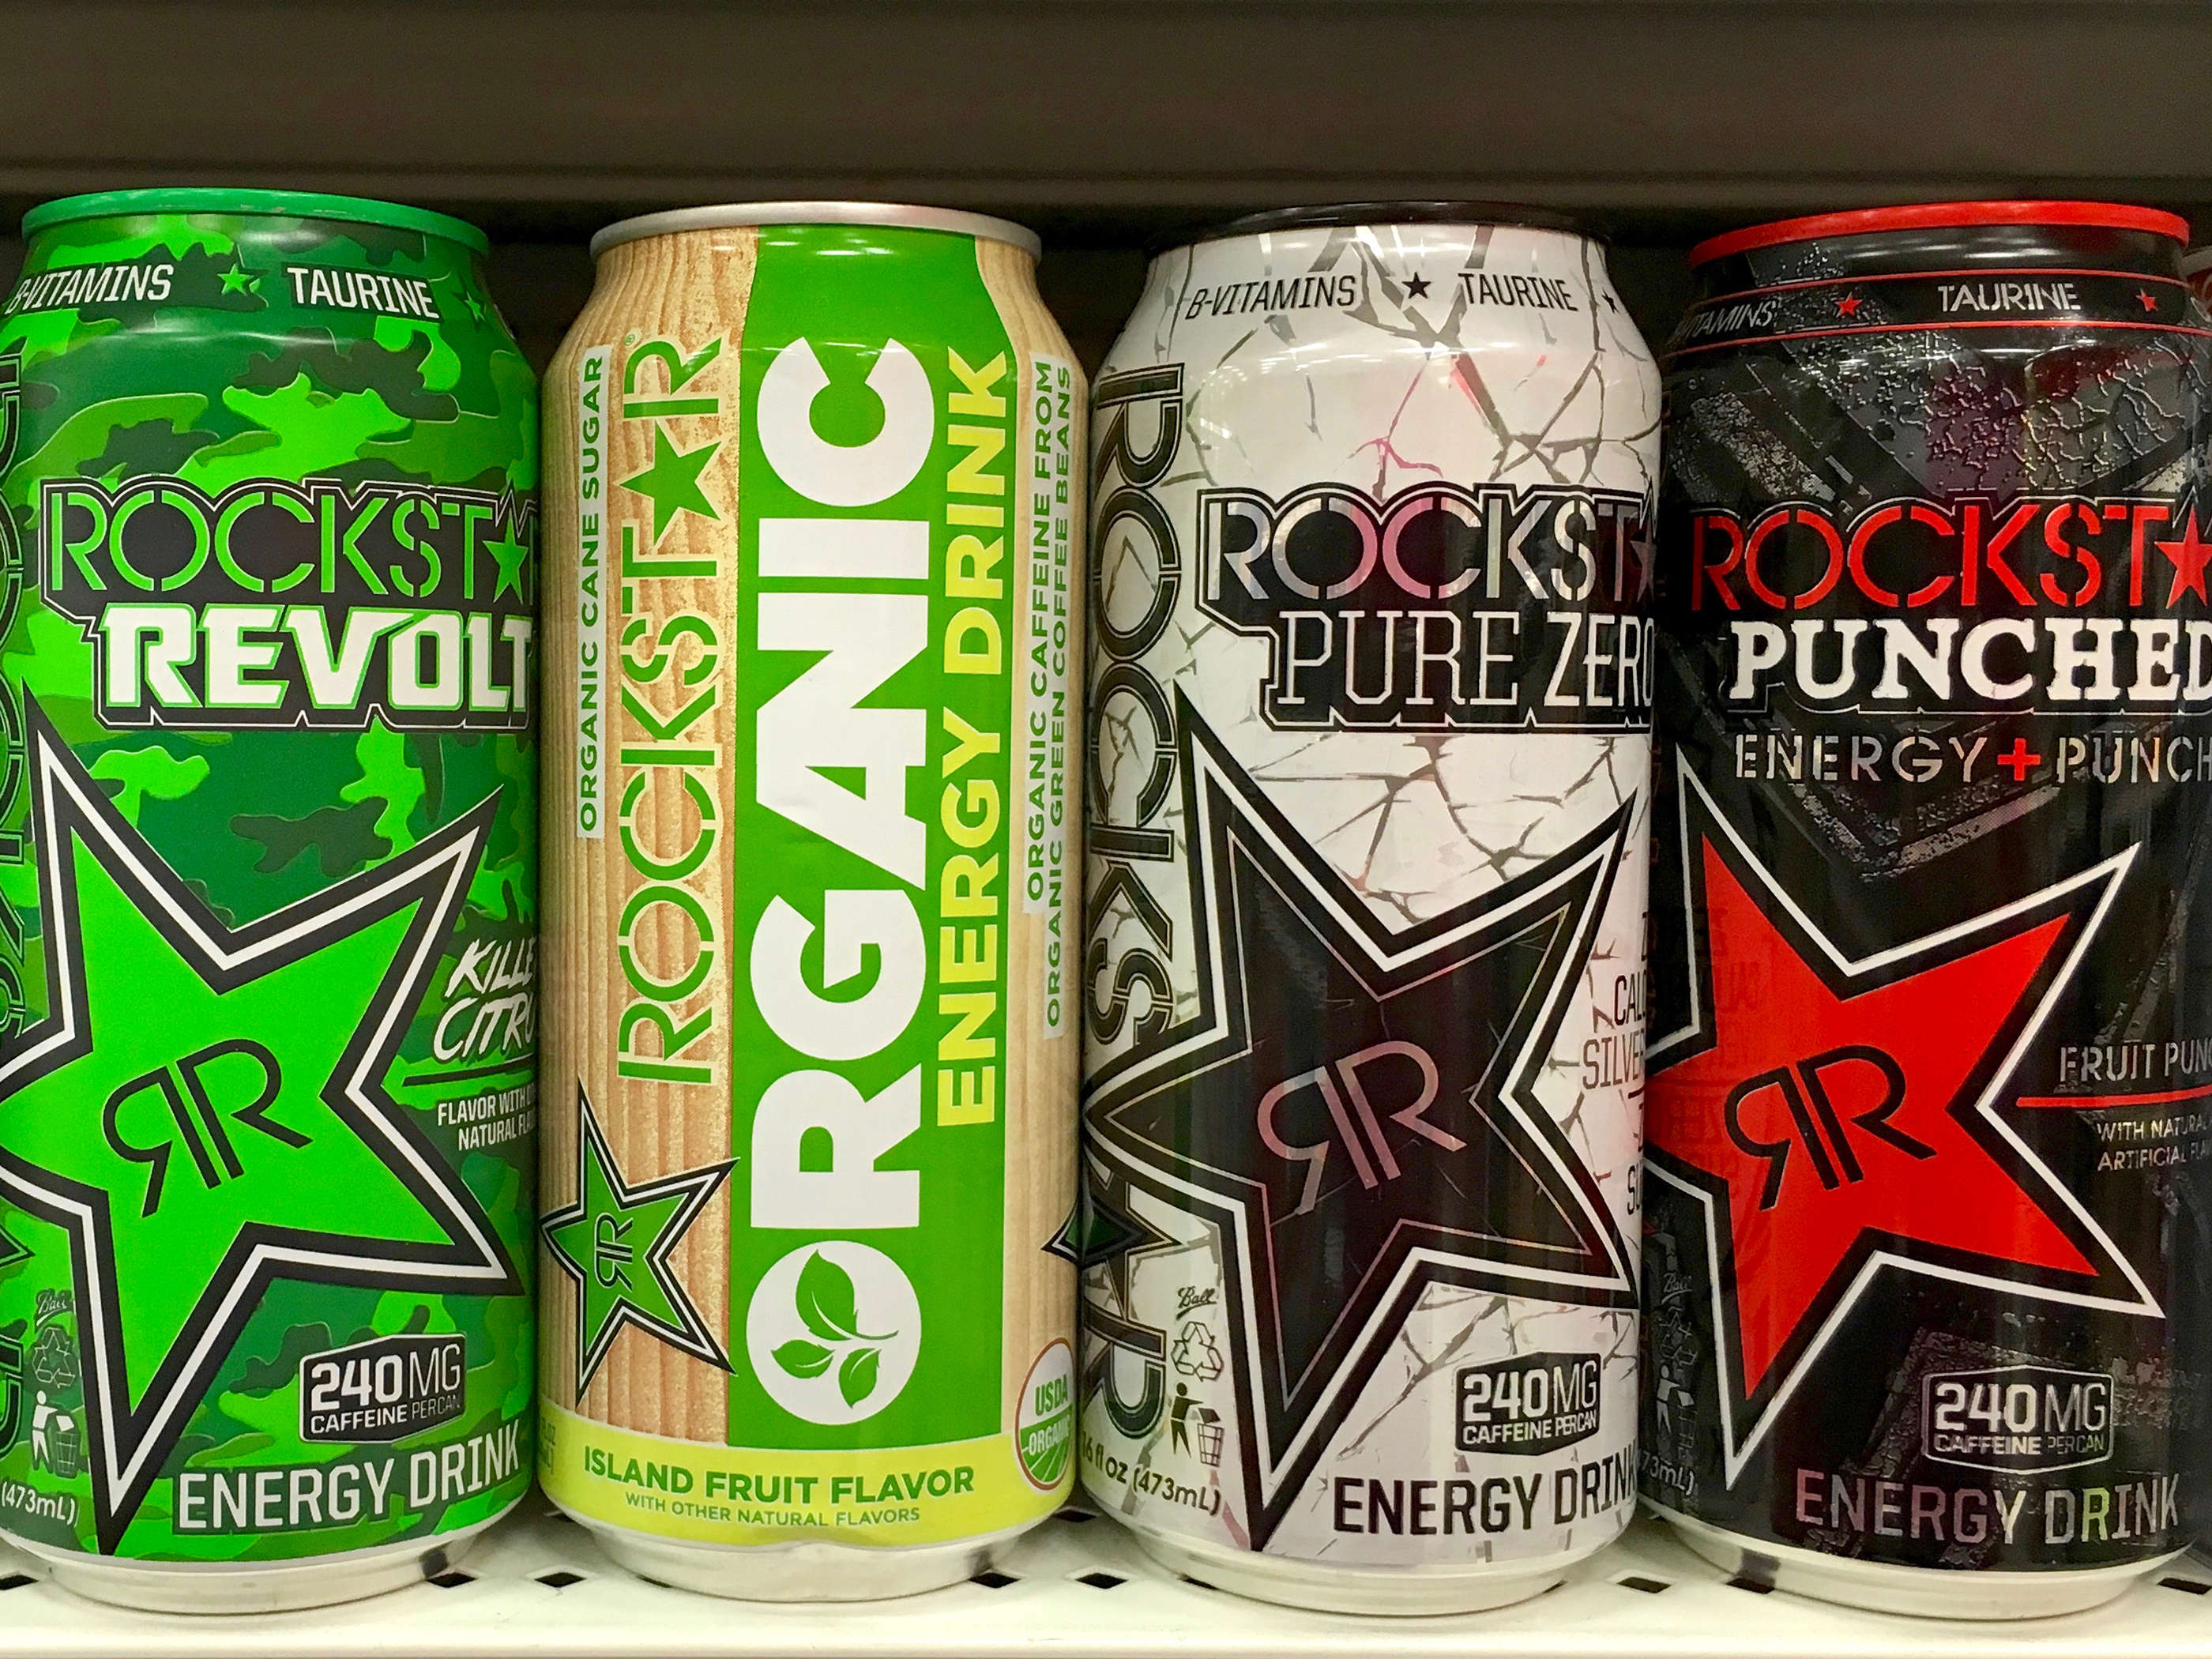 Rockstar Energy Drink Founder Cashing Out For Nearly $4 Billion